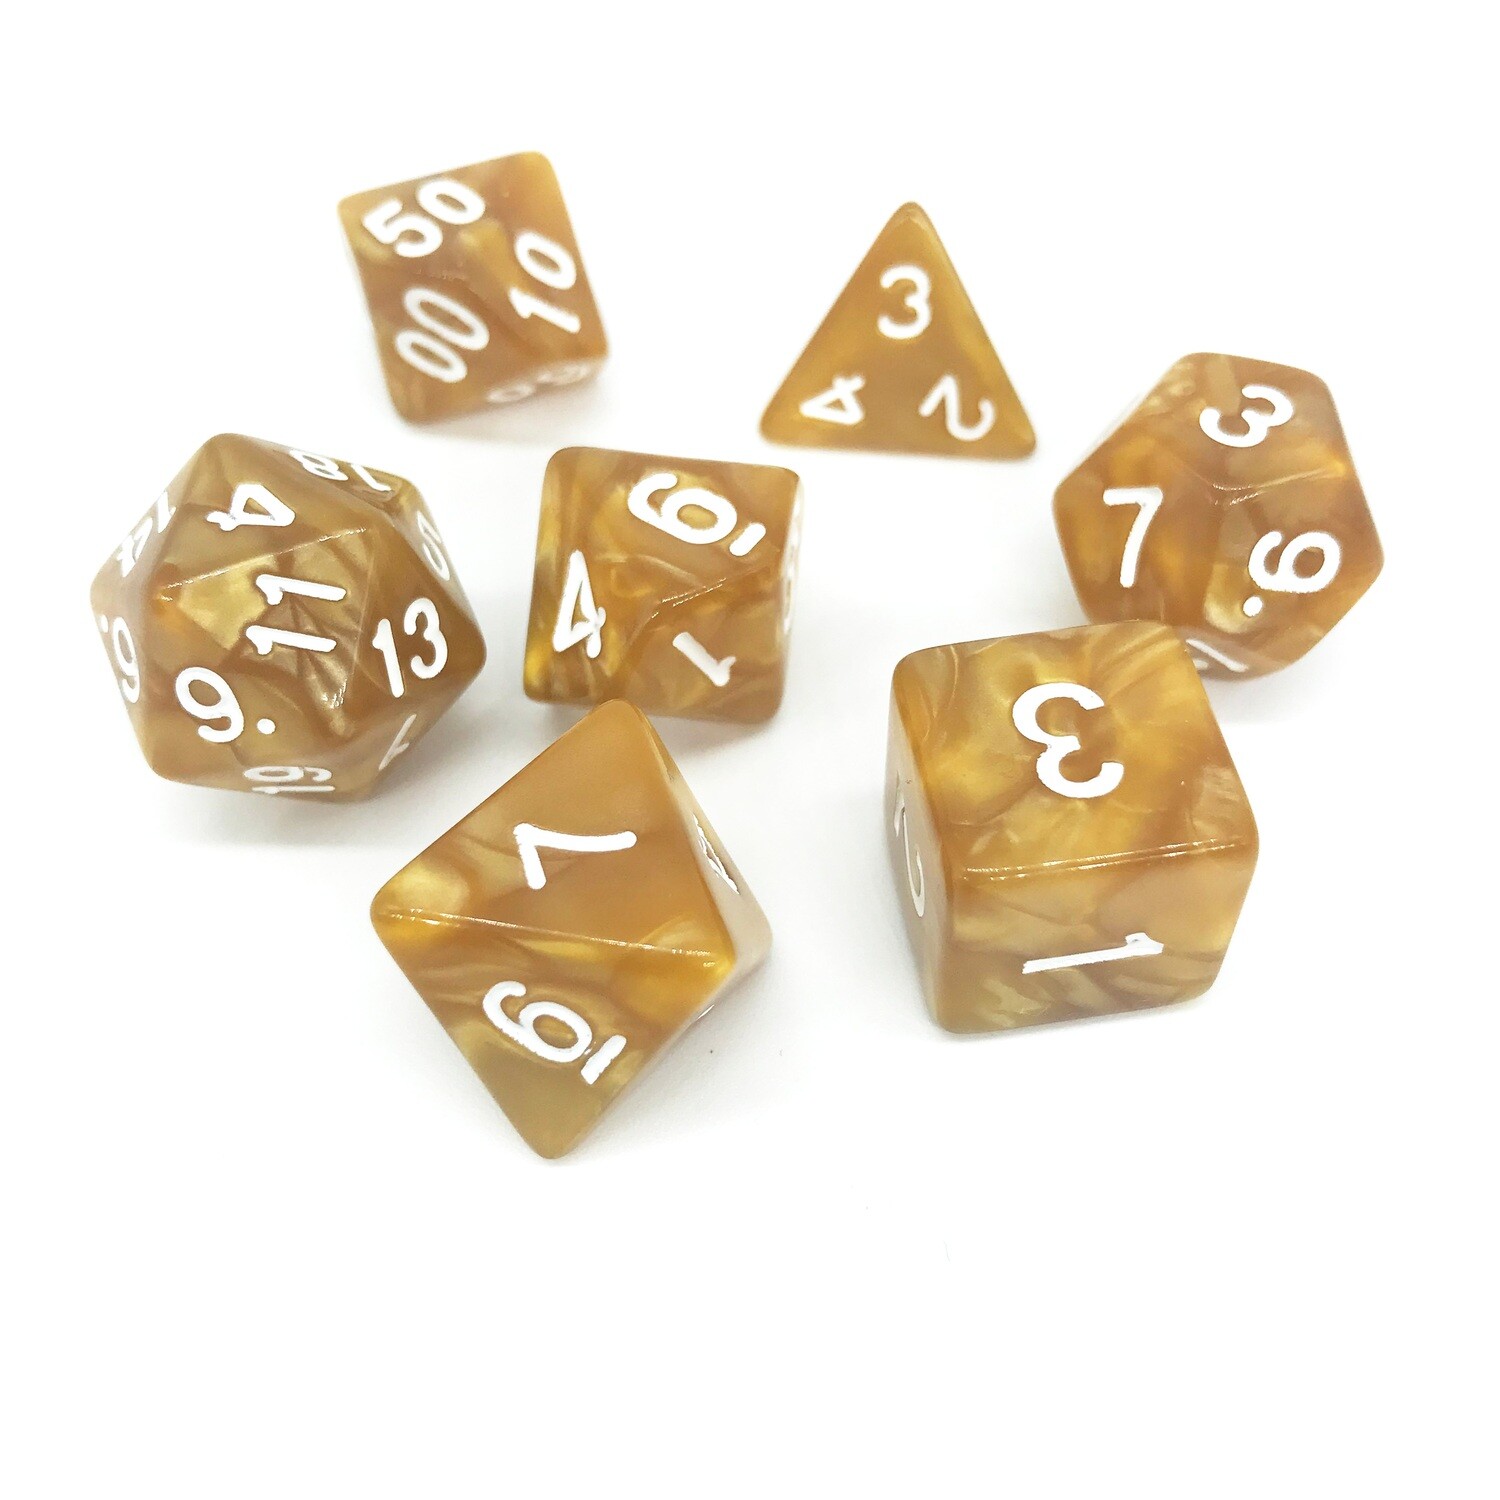 Dice Set - Light Brown marbled with white numbers